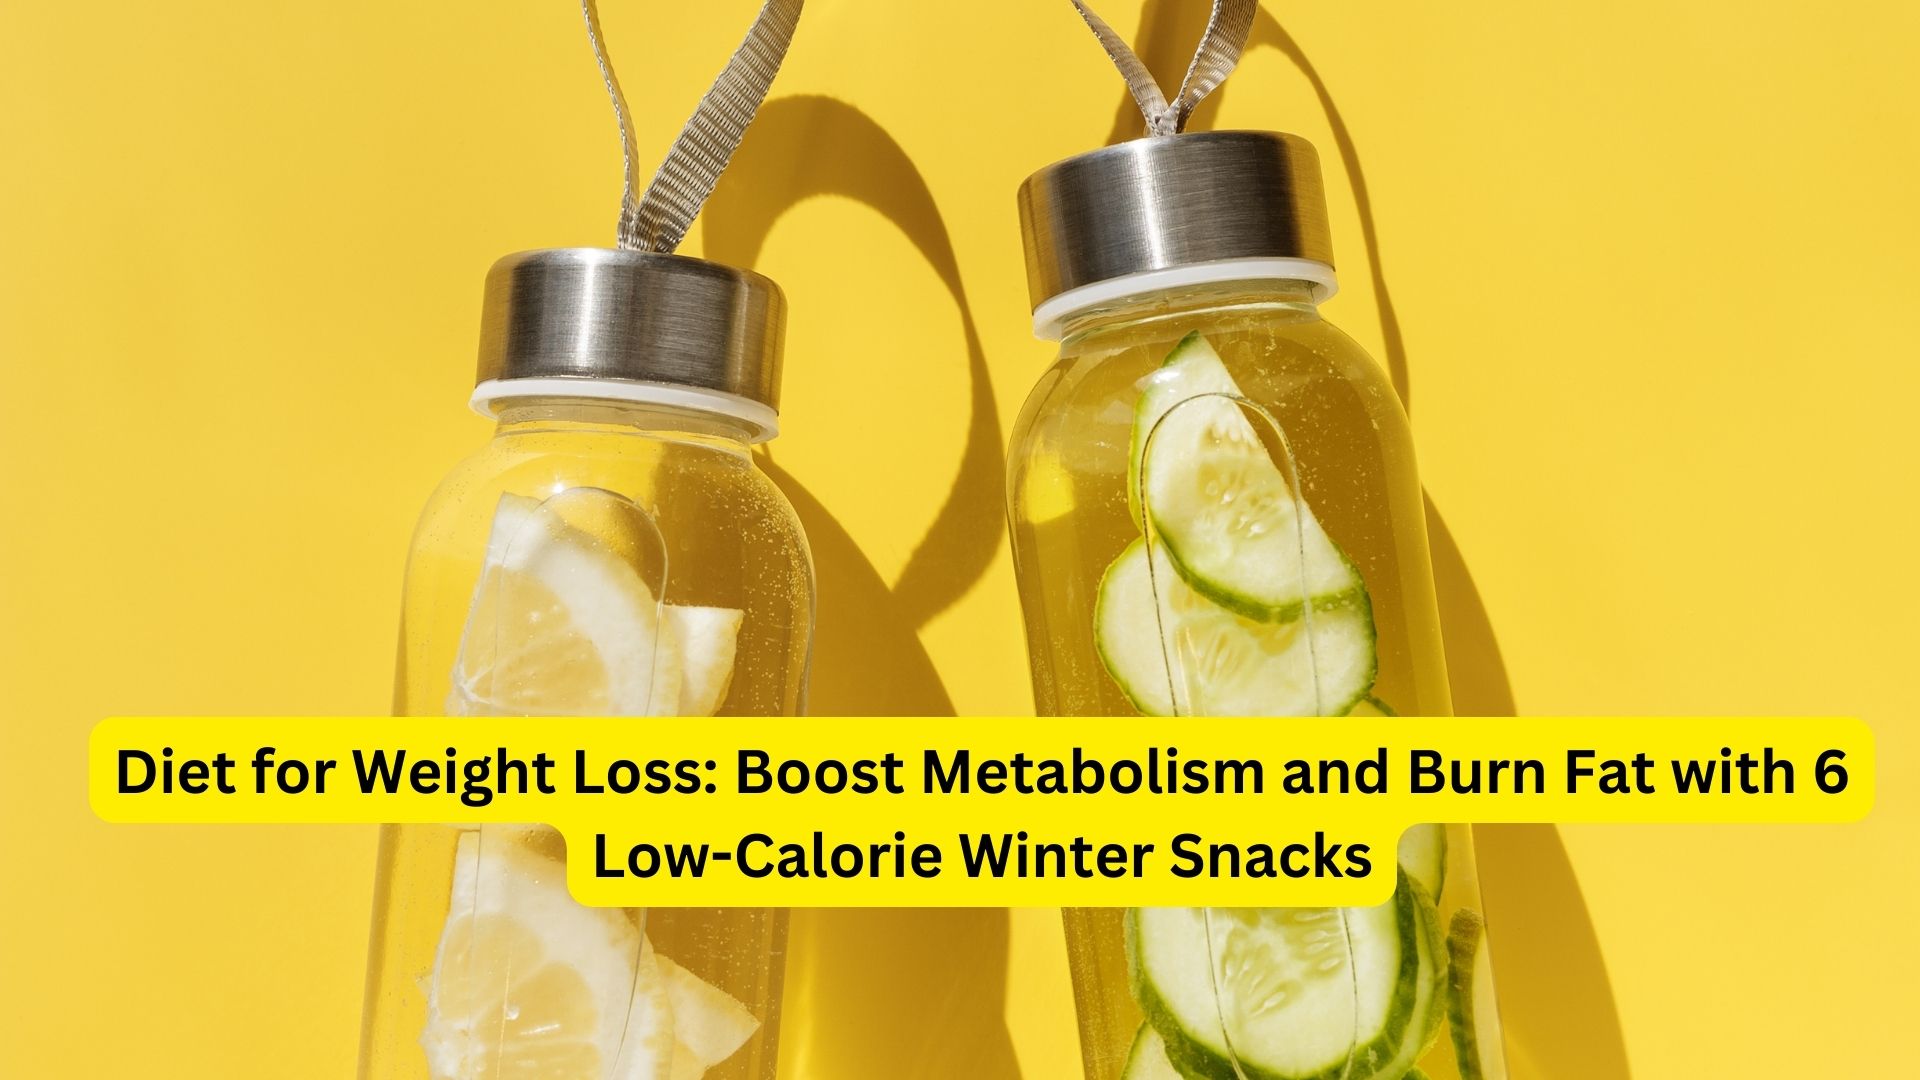 Diet for Weight Loss: Boost Metabolism and Burn Fat with 6 Low-Calorie Winter Snacks